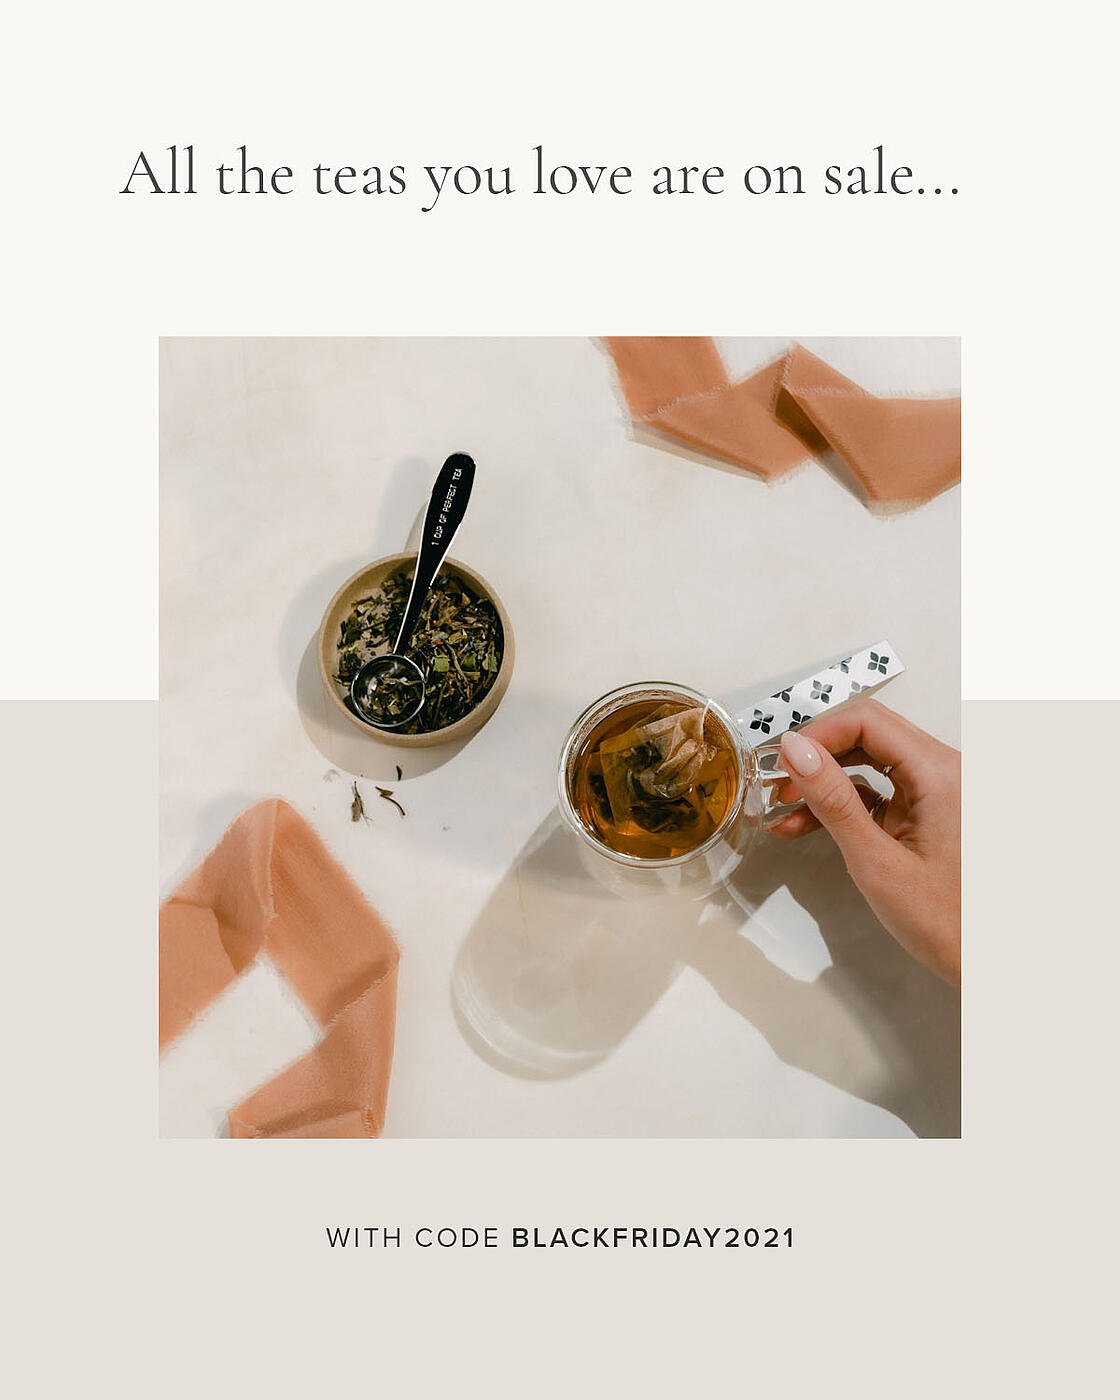 Art of Tea Cyber Monday 2021 Extended Sale: 25% Off Sitewide + 3x LoyalTea Points On All Purchases + Free Tea On $200+ Orders!